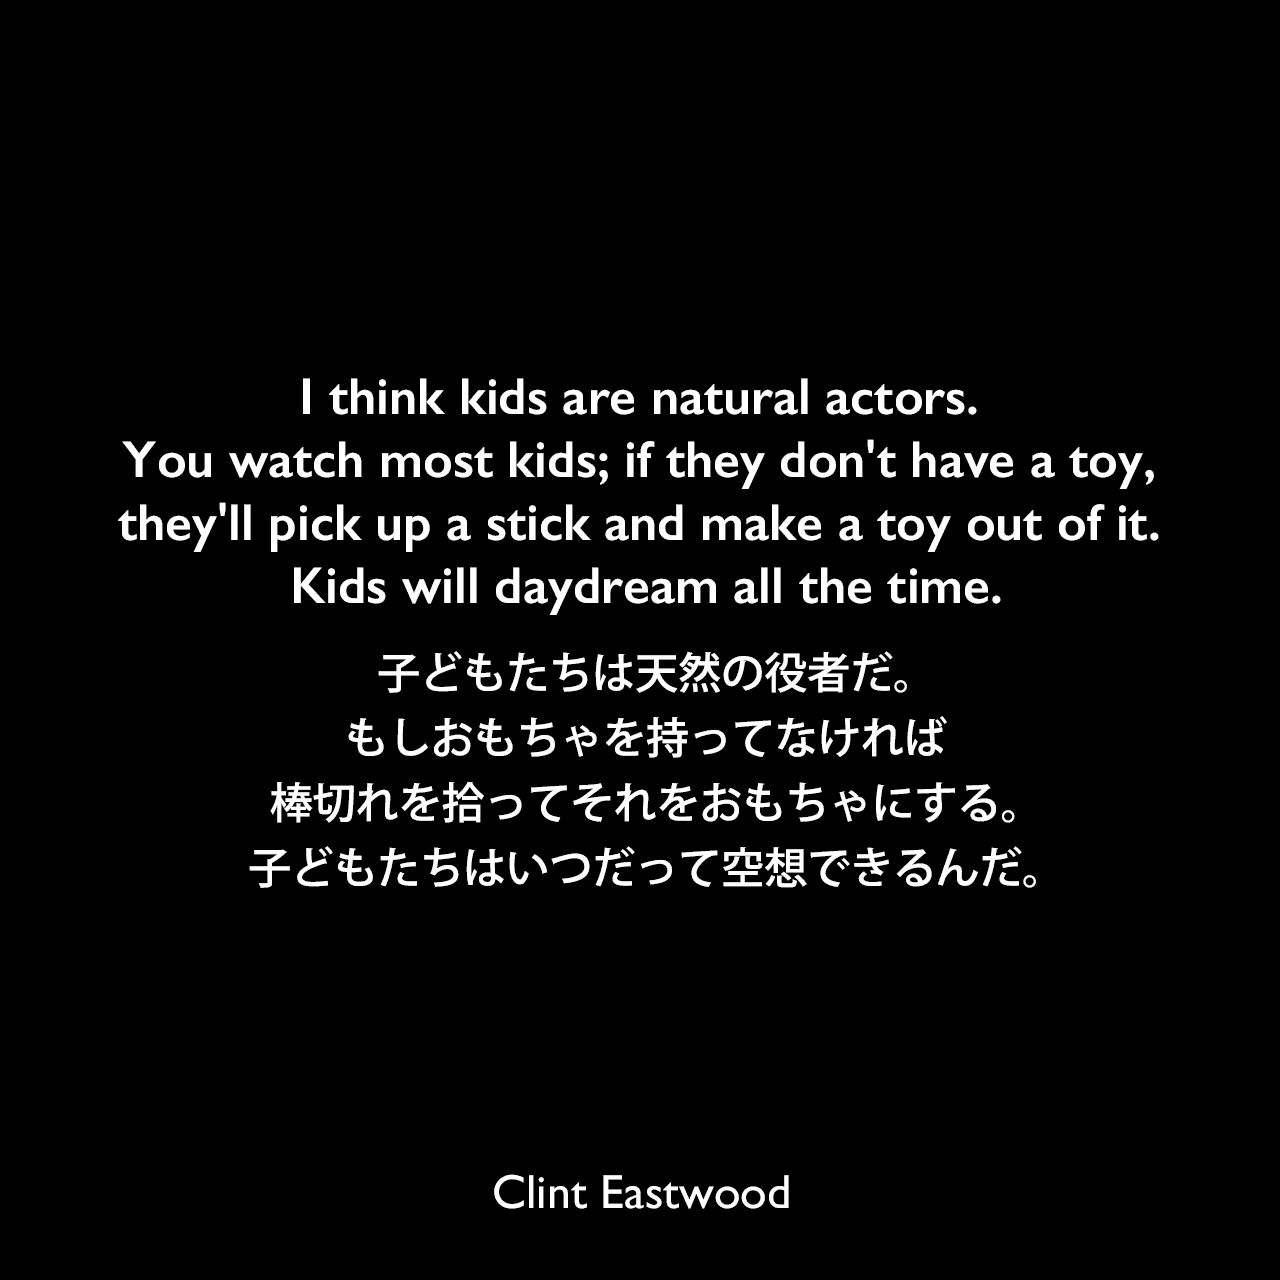 I think kids are natural actors. You watch most kids; if they don't have a toy, they'll pick up a stick and make a toy out of it. Kids will daydream all the time.子どもたちは天然の役者だ。もしおもちゃを持ってなければ、棒切れを拾ってそれをおもちゃにする。子どもたちはいつだって空想できるんだ。Clint Eastwood